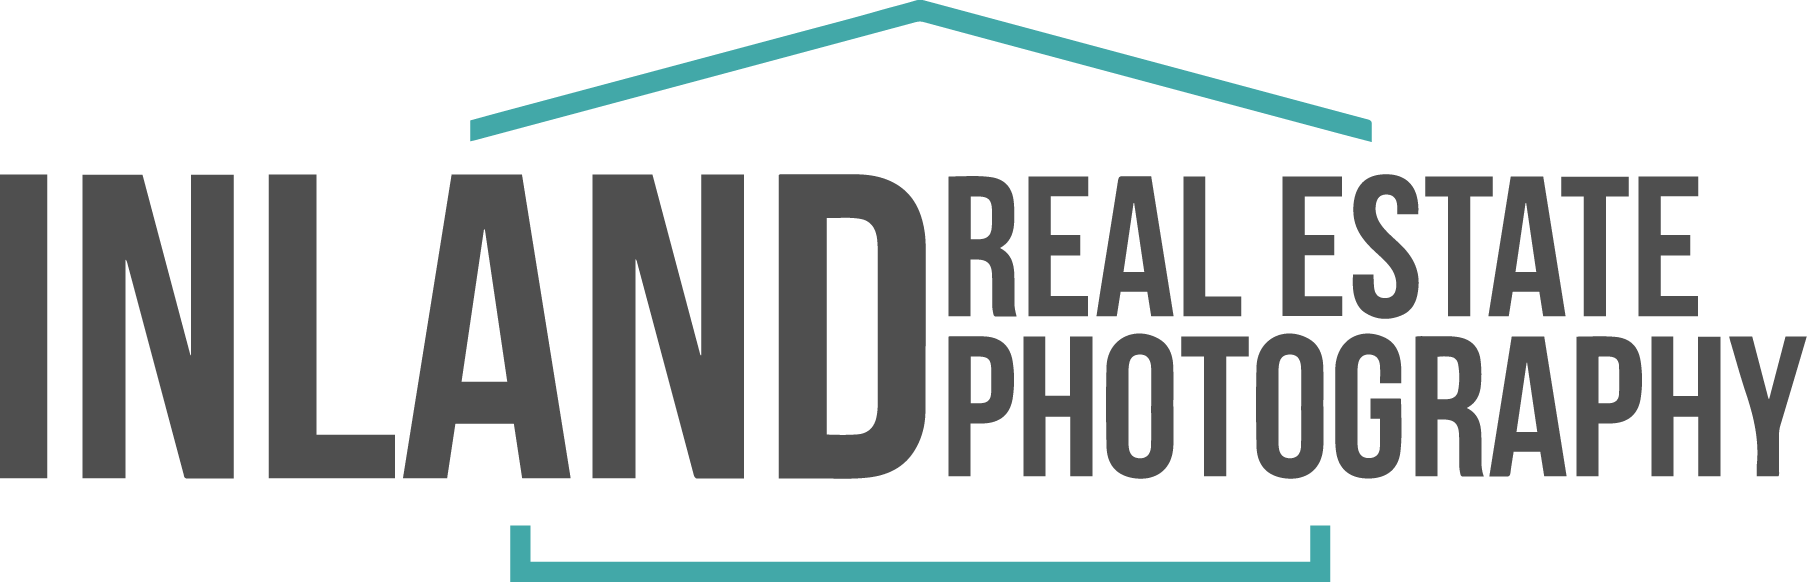 Inland Real Estate Photography